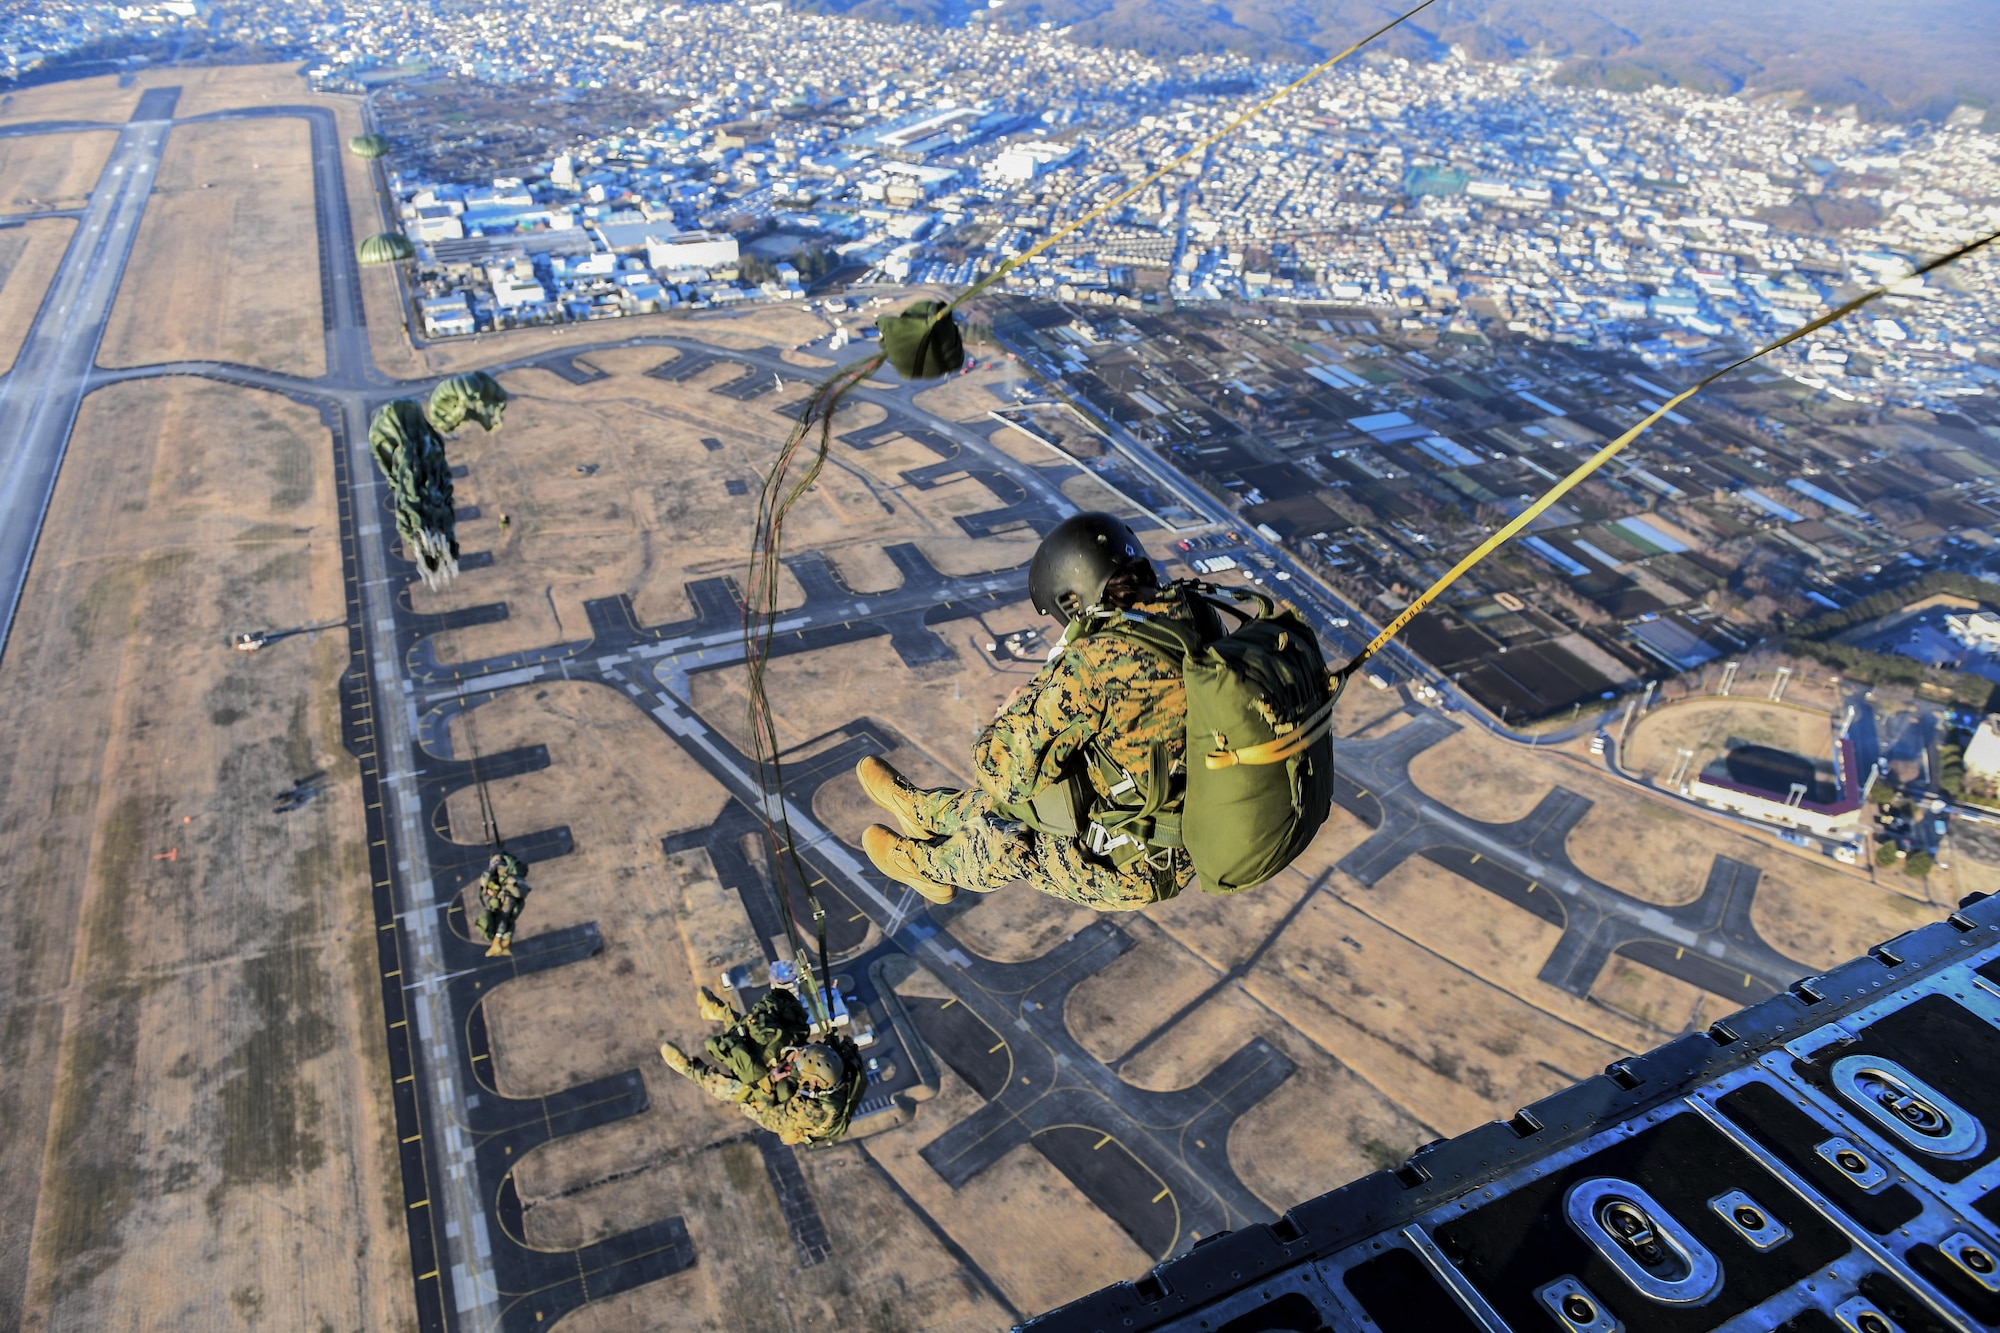 Marines with the 3rd Reconnaissance Battalion, 3rd Marine Division, III Marine Expeditionary Force, perform a static line parachute jump on Jan. 11, 2017, at Yokota Air Base, Japan. The 36th Airlift Squadron provided airlift supports to U.S. Marine Corp’s weeklong jump training. (U.S. Air Force photo by Airman 1st Class Donald Hudson)